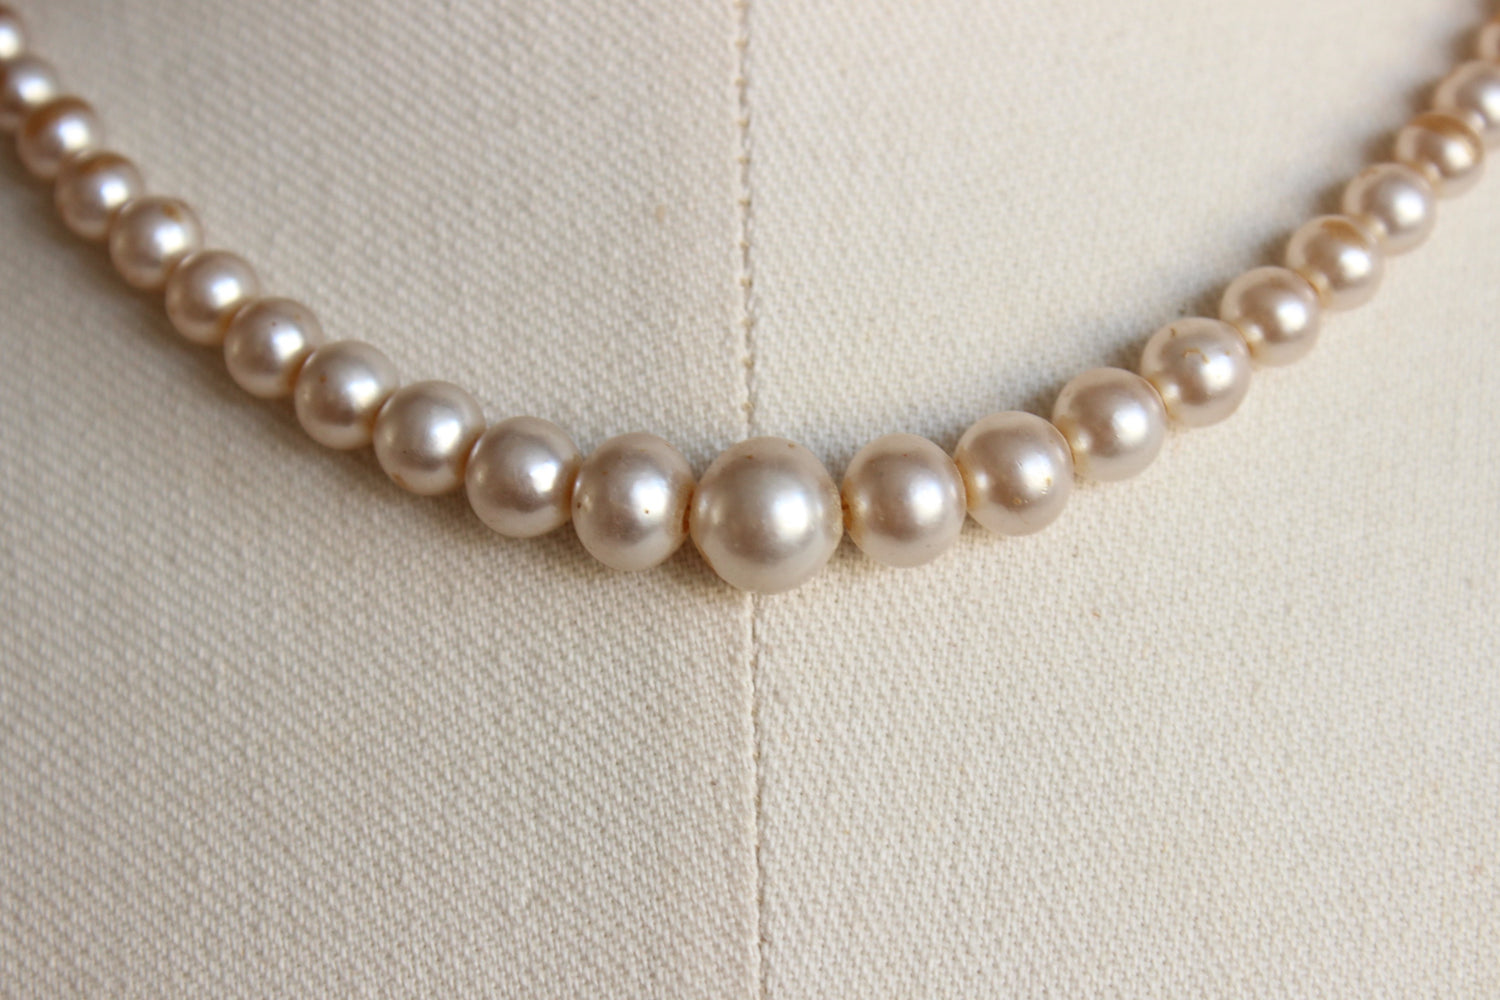 Vintage 1950s 1960s Faux Pearl Choker Necklace 16 Inch From Japan